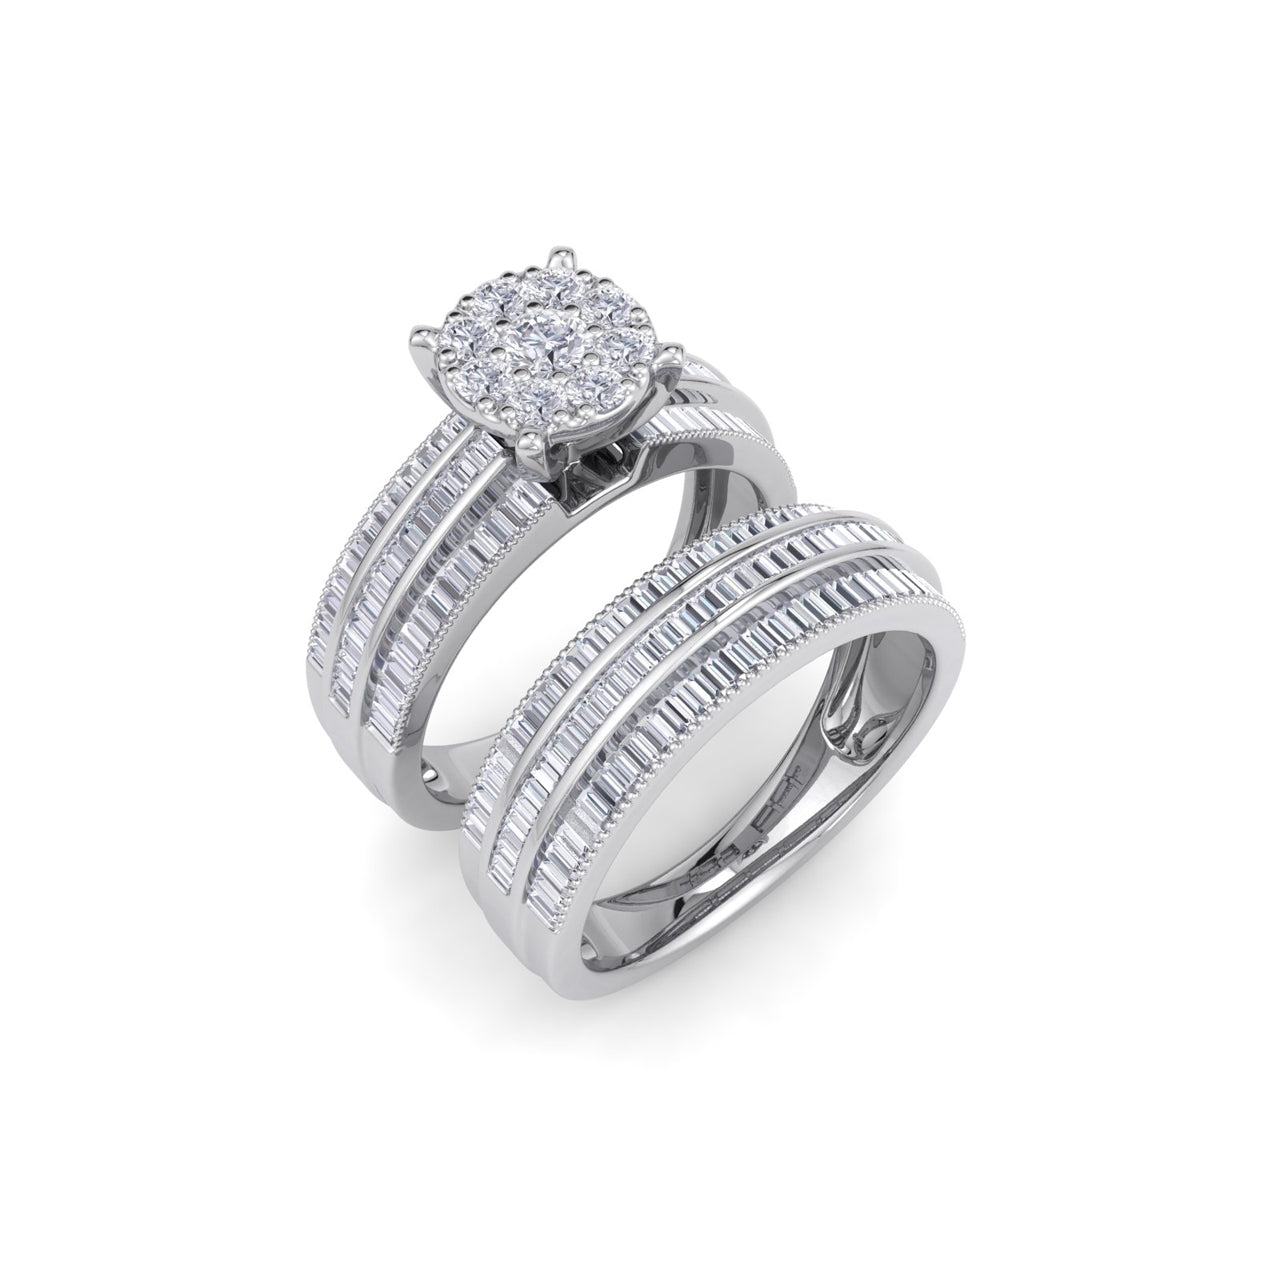 Bridal ring set in white gold with white diamonds of 1.35 ct in weight